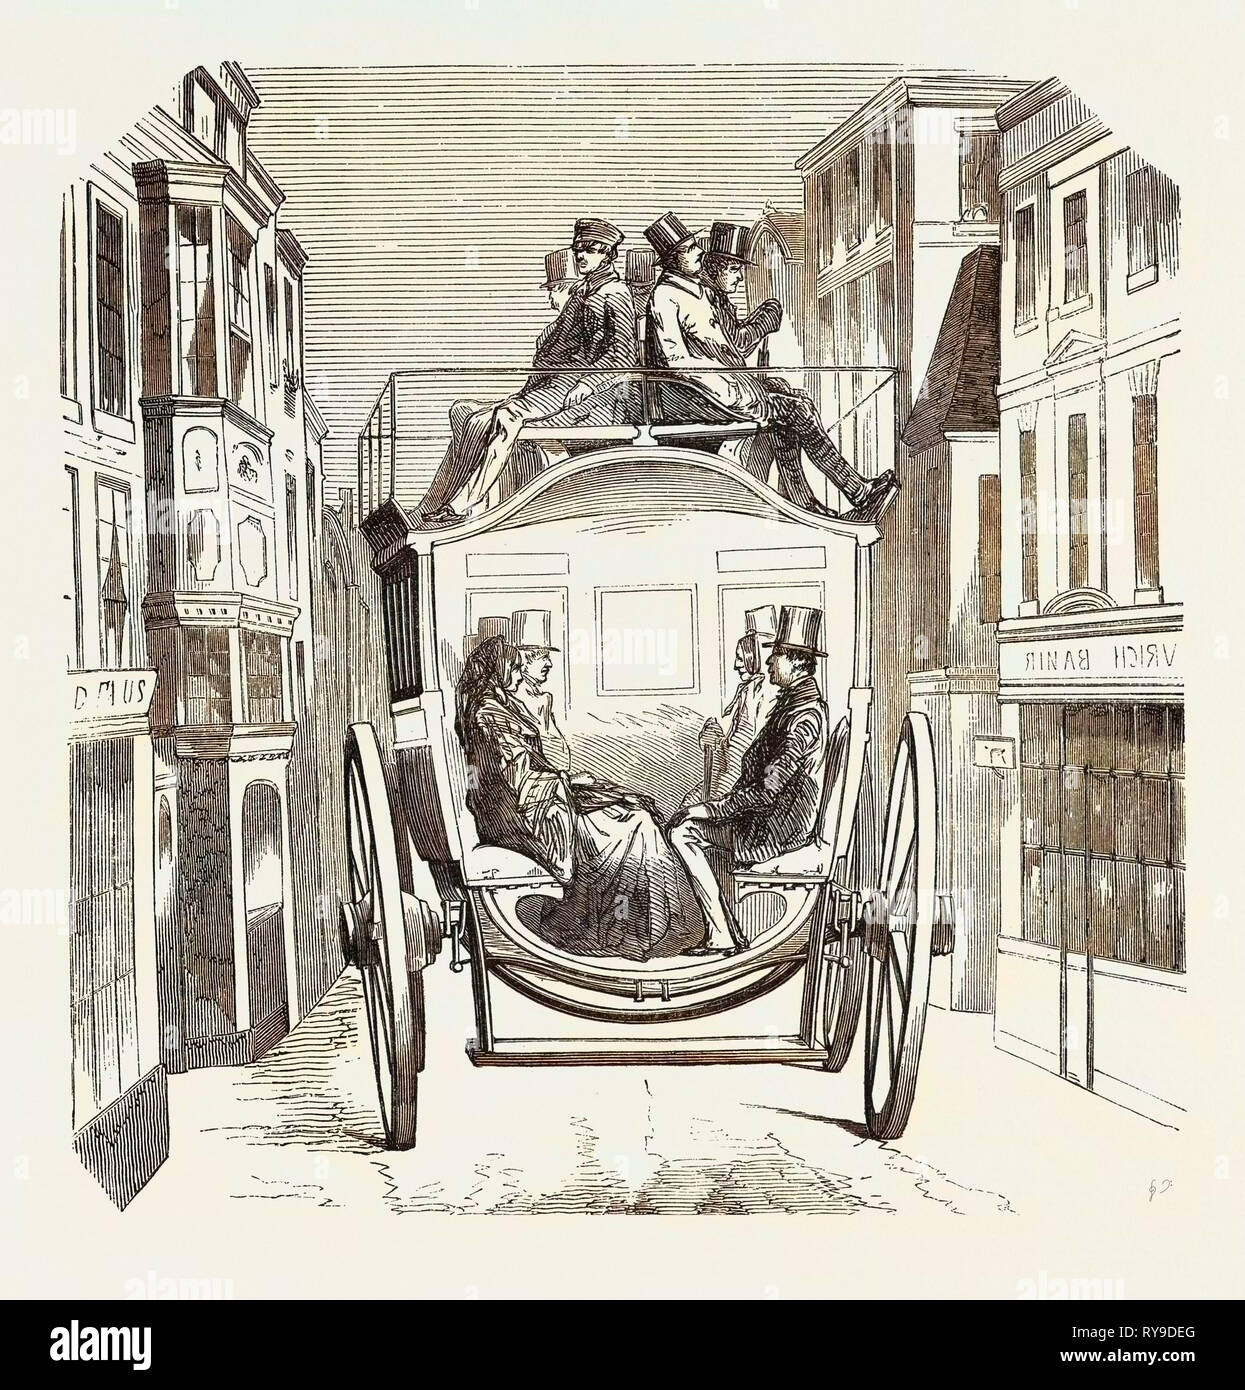 Model Adopted by the New Bus Company from the City of London. Interior Trim. 1855, UK. Engraving Stock Photo